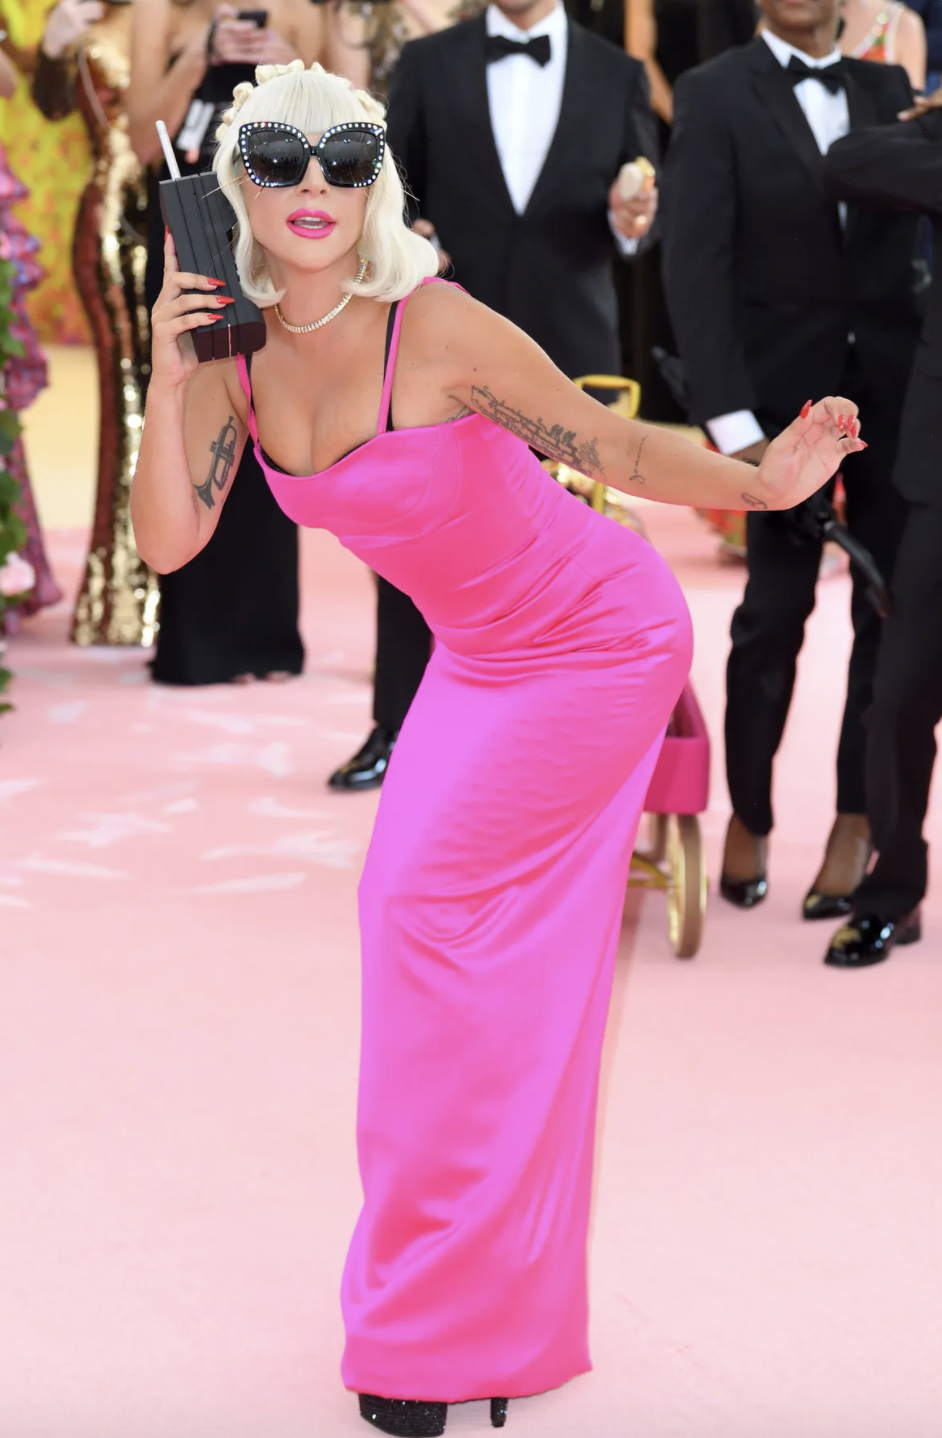  Lady Gaga in one of her CAMP, pink outfit changes on the red carpet at the 2019 Met Gala where she was the host. (Credit: Getty Images).